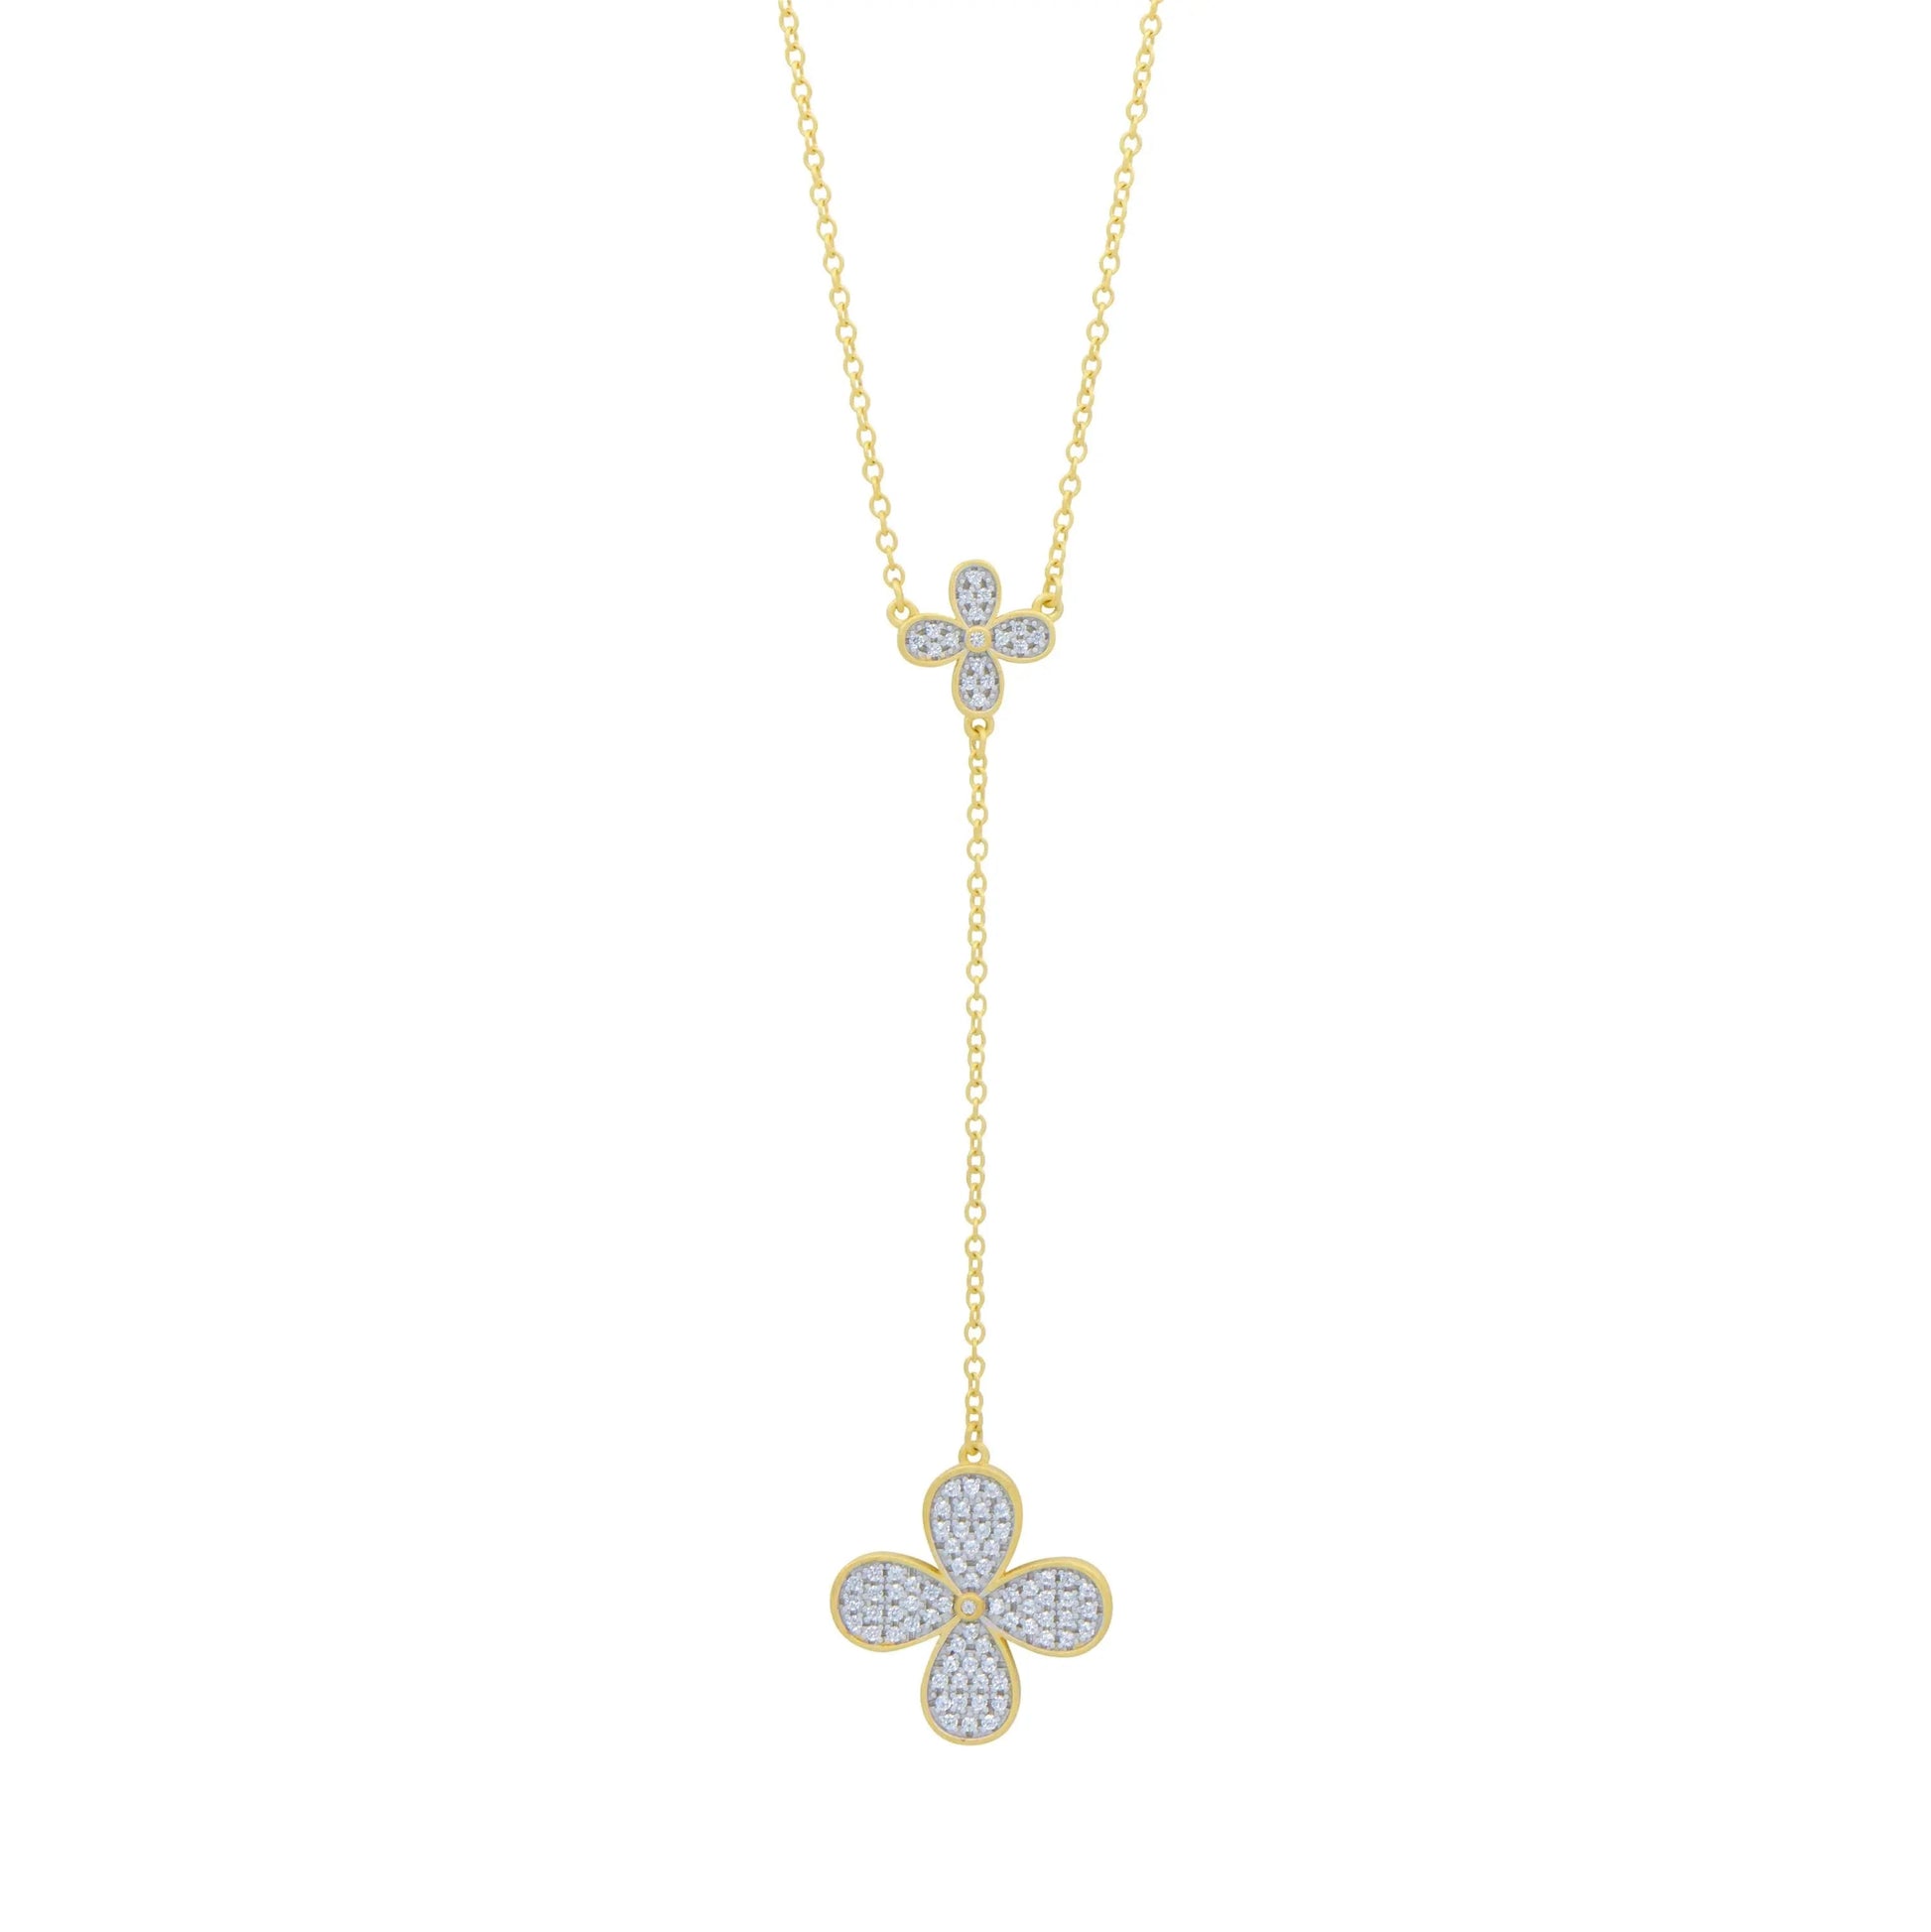  Blossoming Brilliance Lariat Necklace Armor of Hope NECKLACE